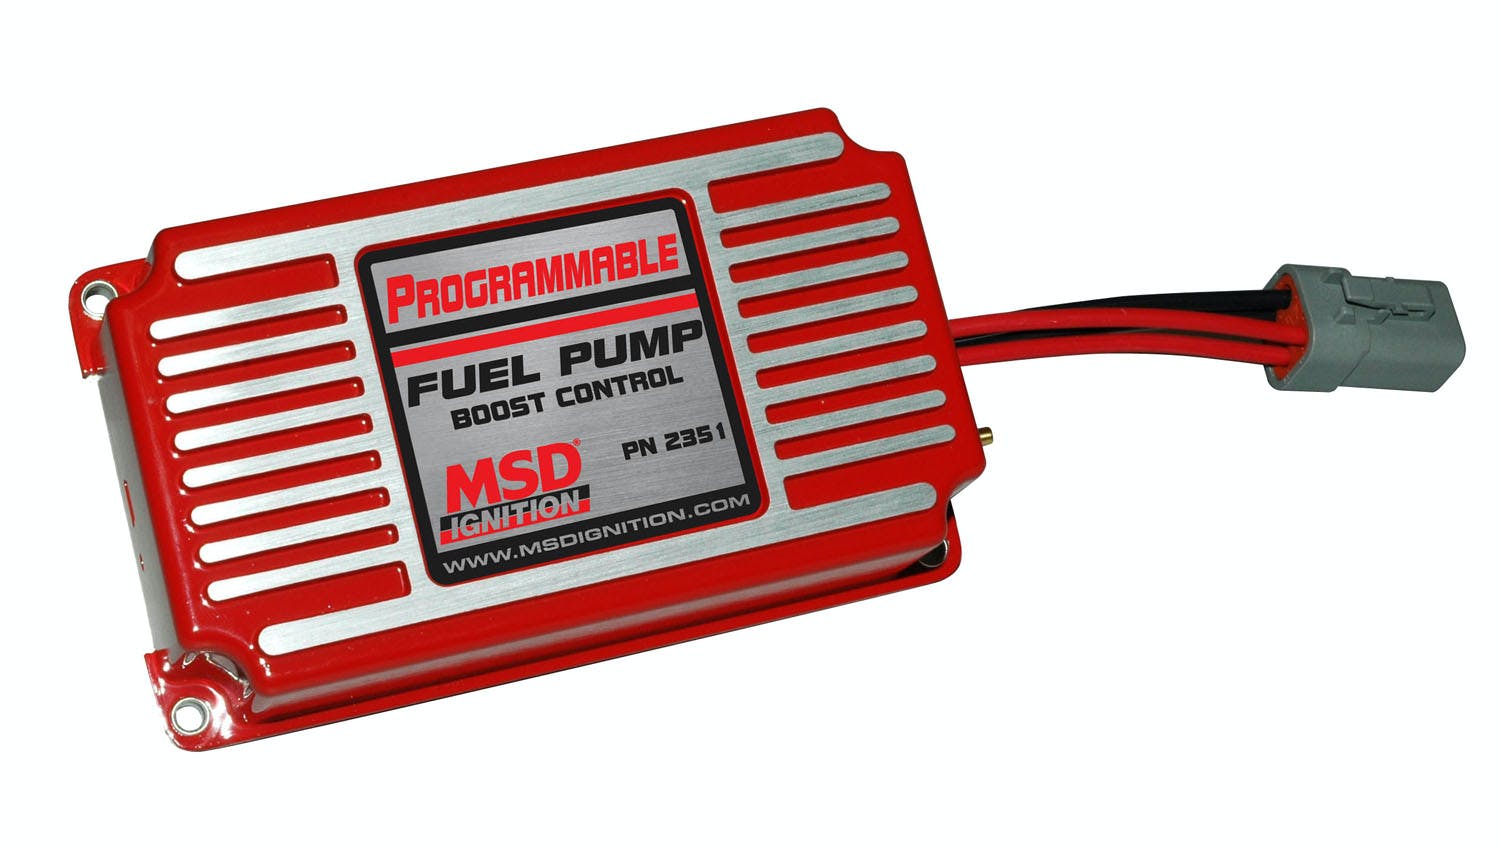 MSD Performance 2351 Fuel Pump Voltage Booster, Programmable